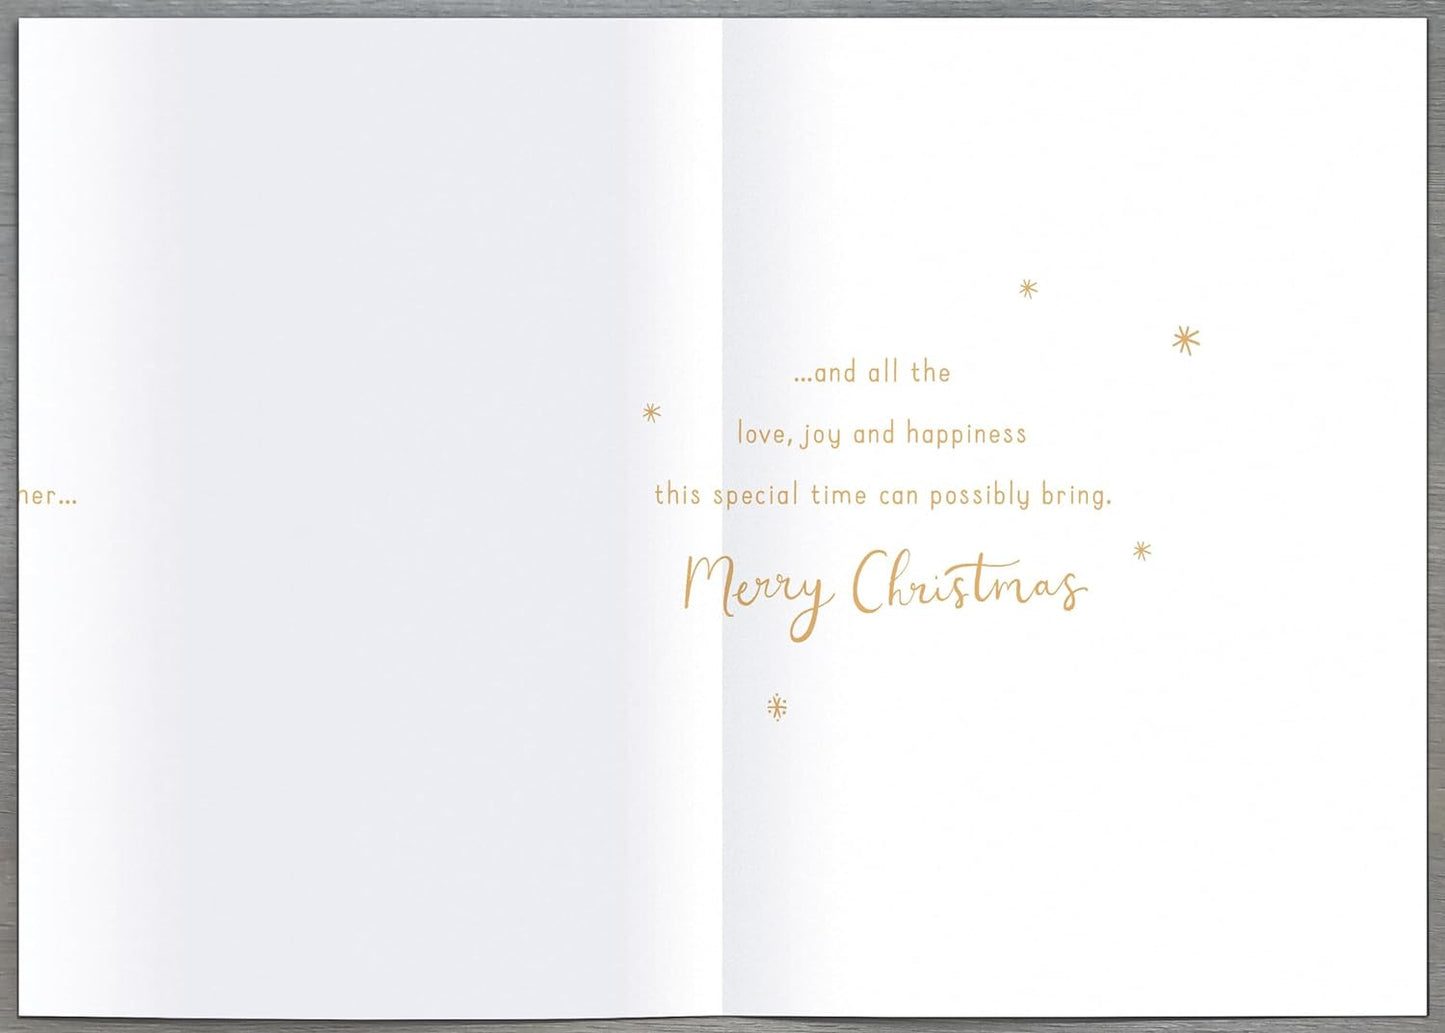 3D Cut Out Luxury Both Of You Crescent Moon Christmas Card